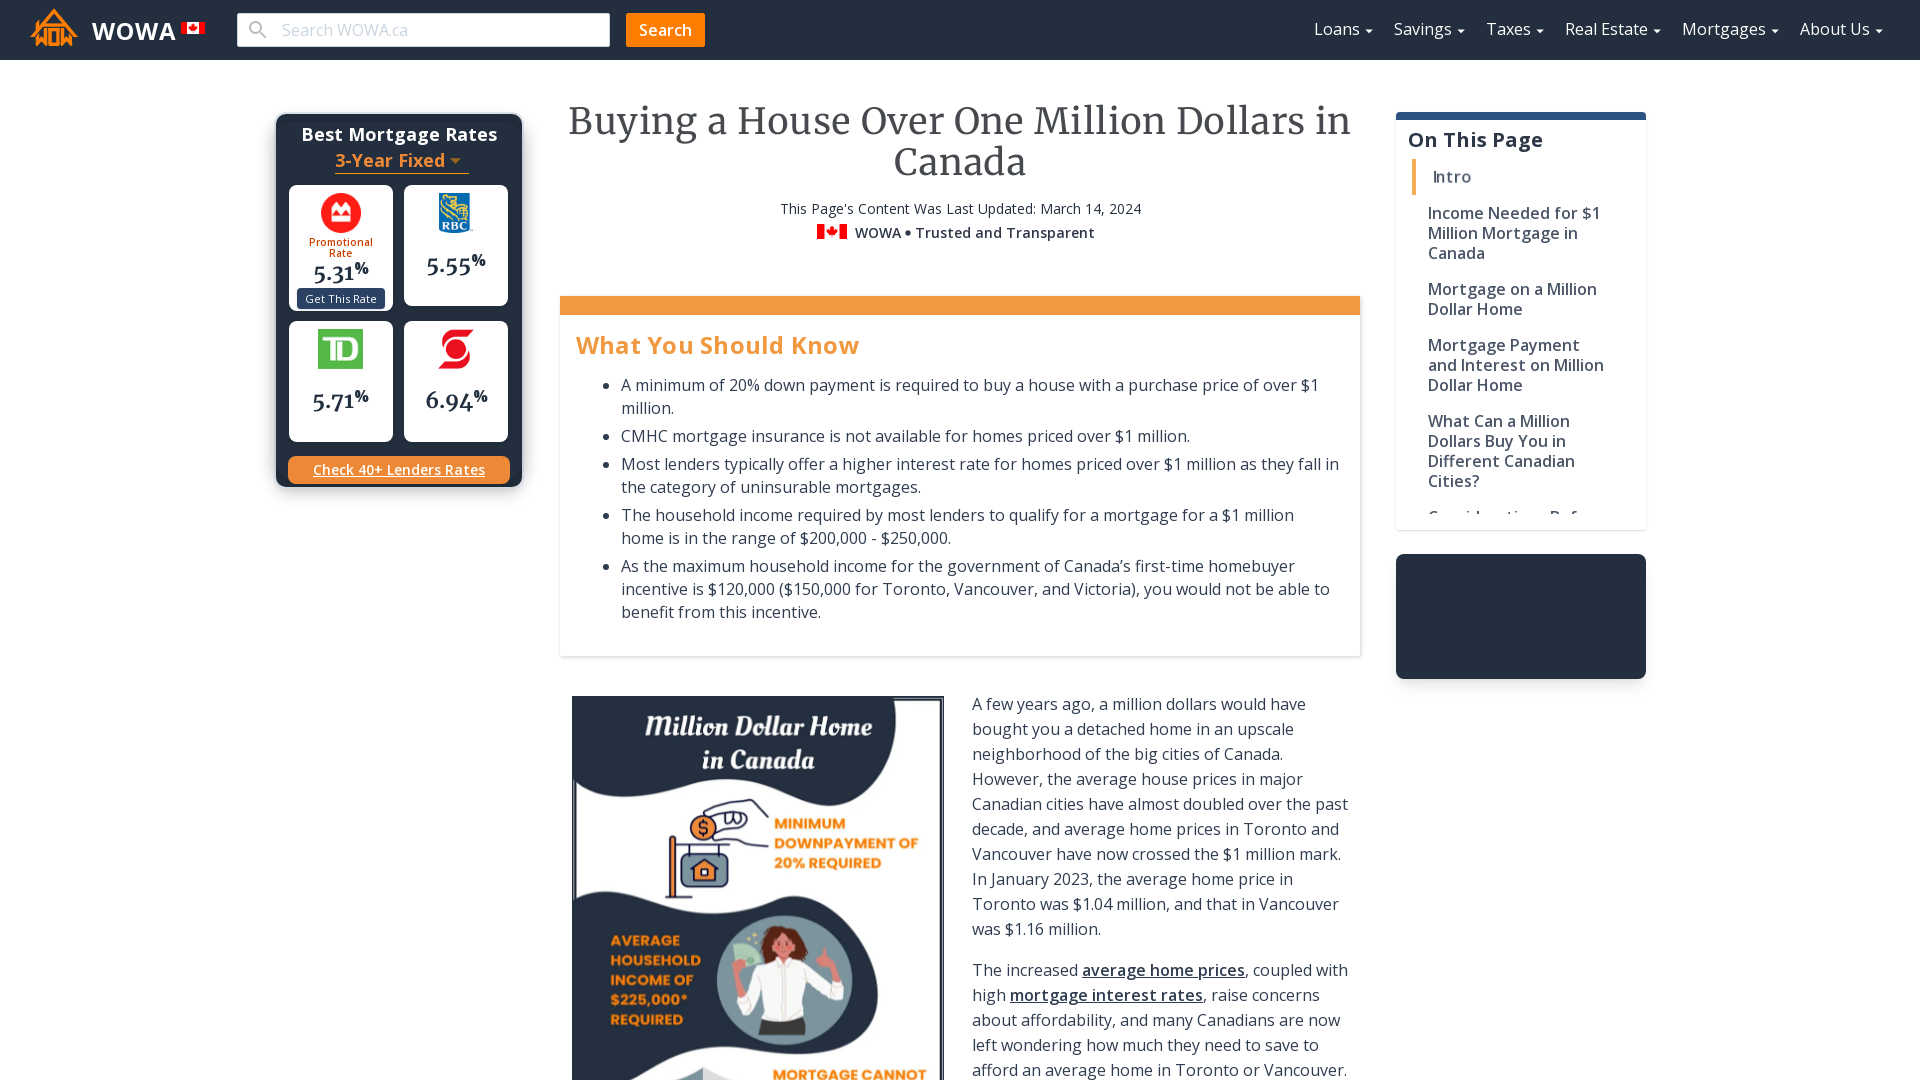 Can You Afford A Mortgage For A Million Dollar Home In Canada